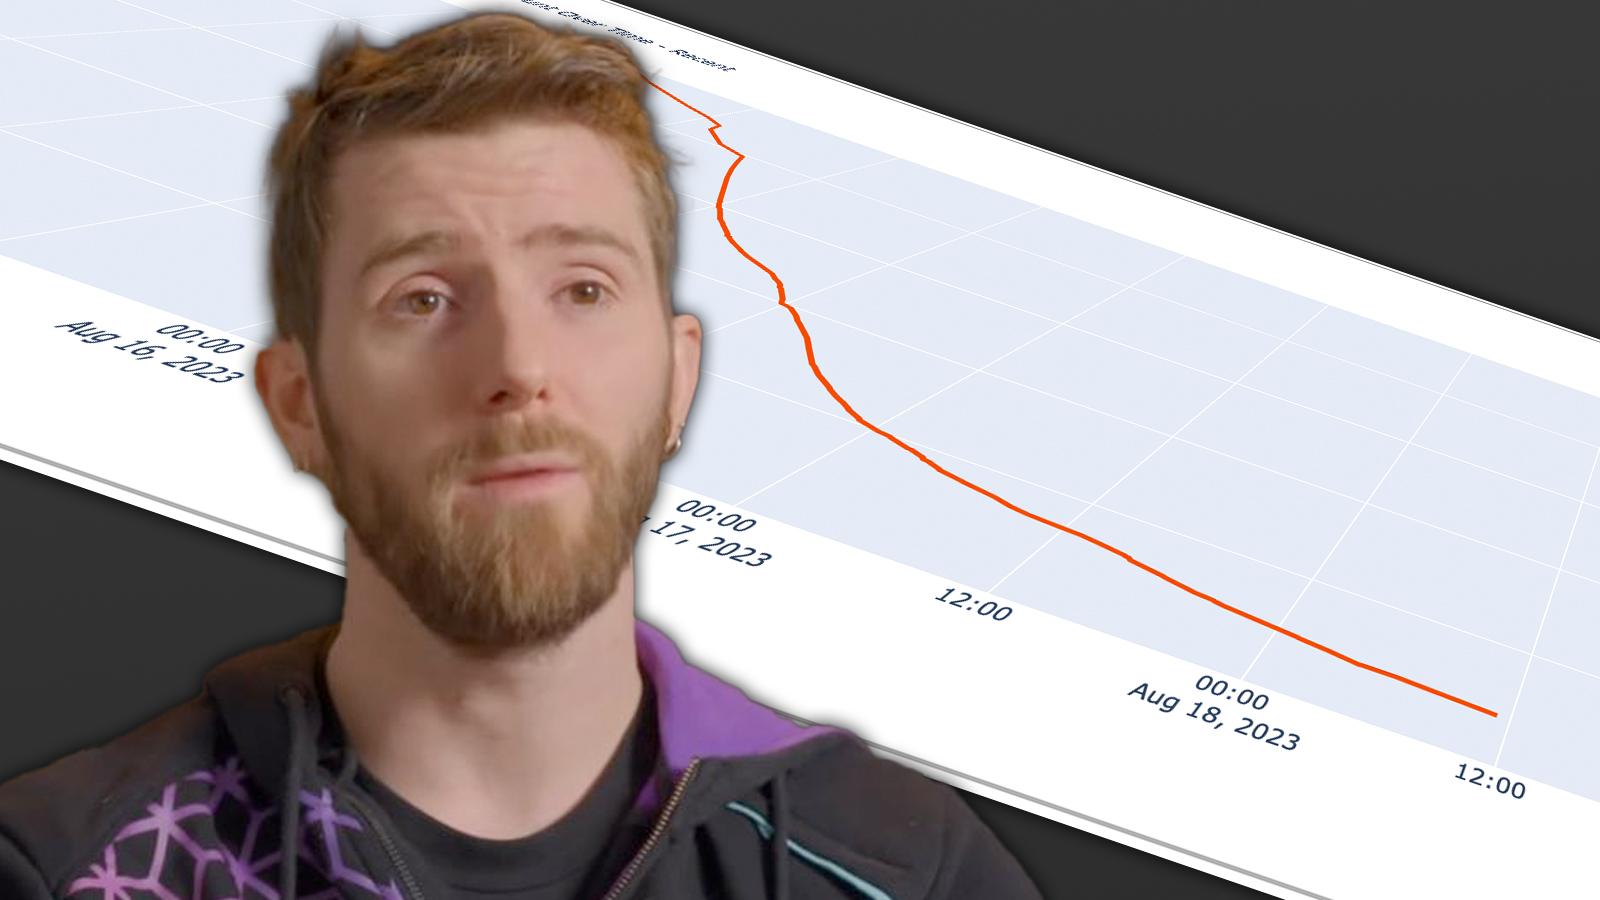 Linus Sebastian in front of the graph detailing the loss of subscribers from Floatplane